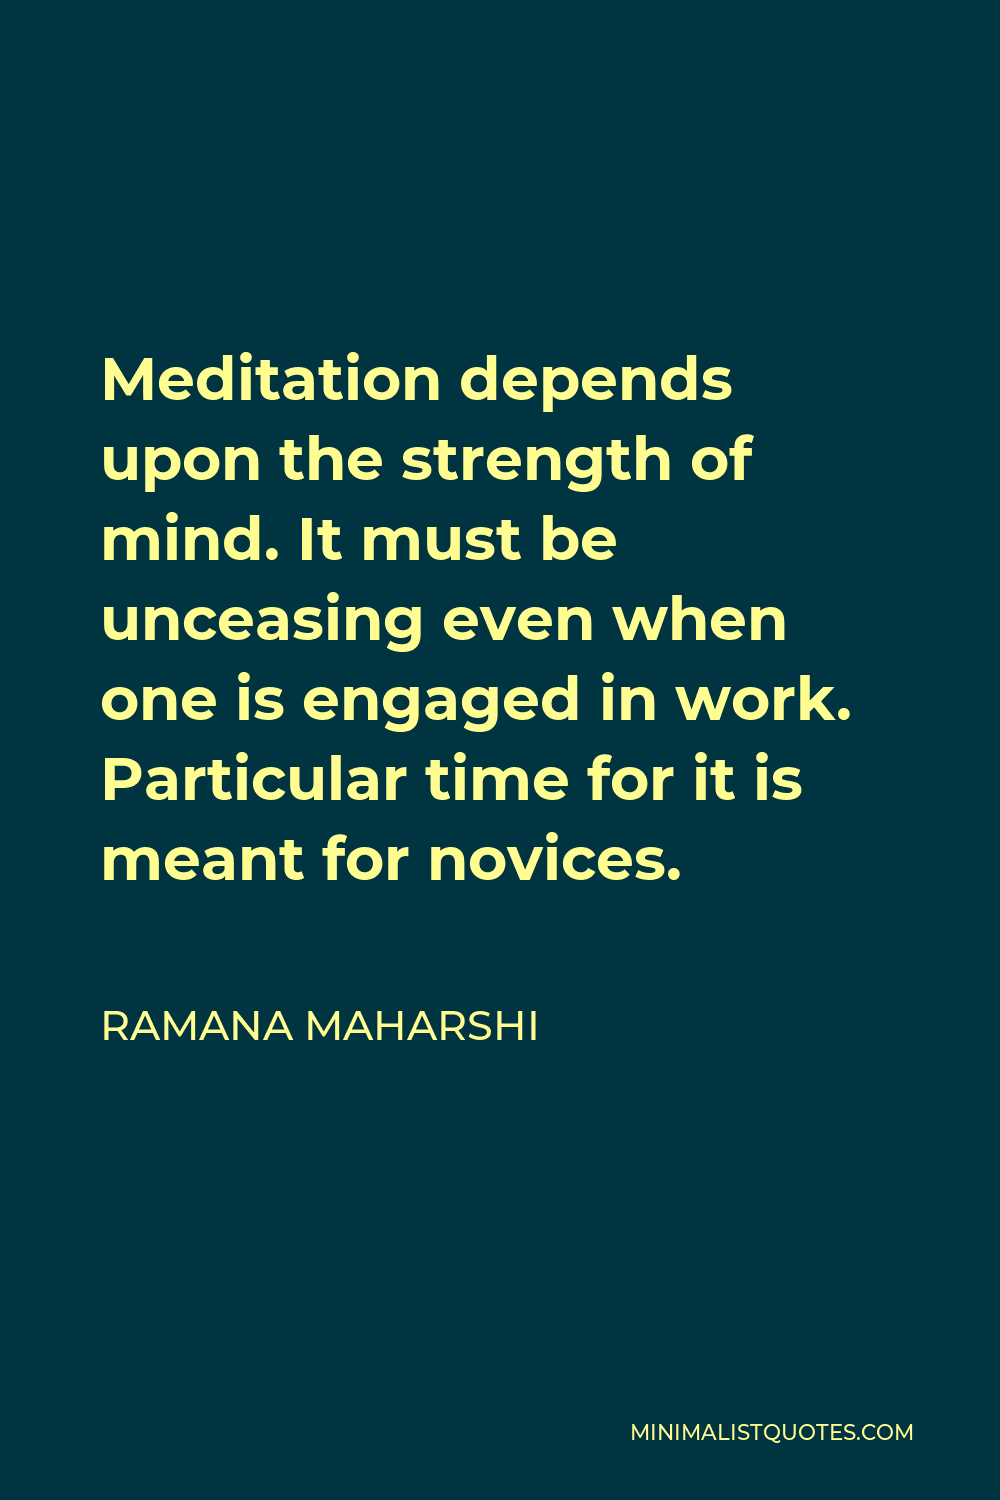 Ramana Maharshi Quote - Meditation depends upon the strength of mind. It must be unceasing even when one is engaged in work. Particular time for it is meant for novices.